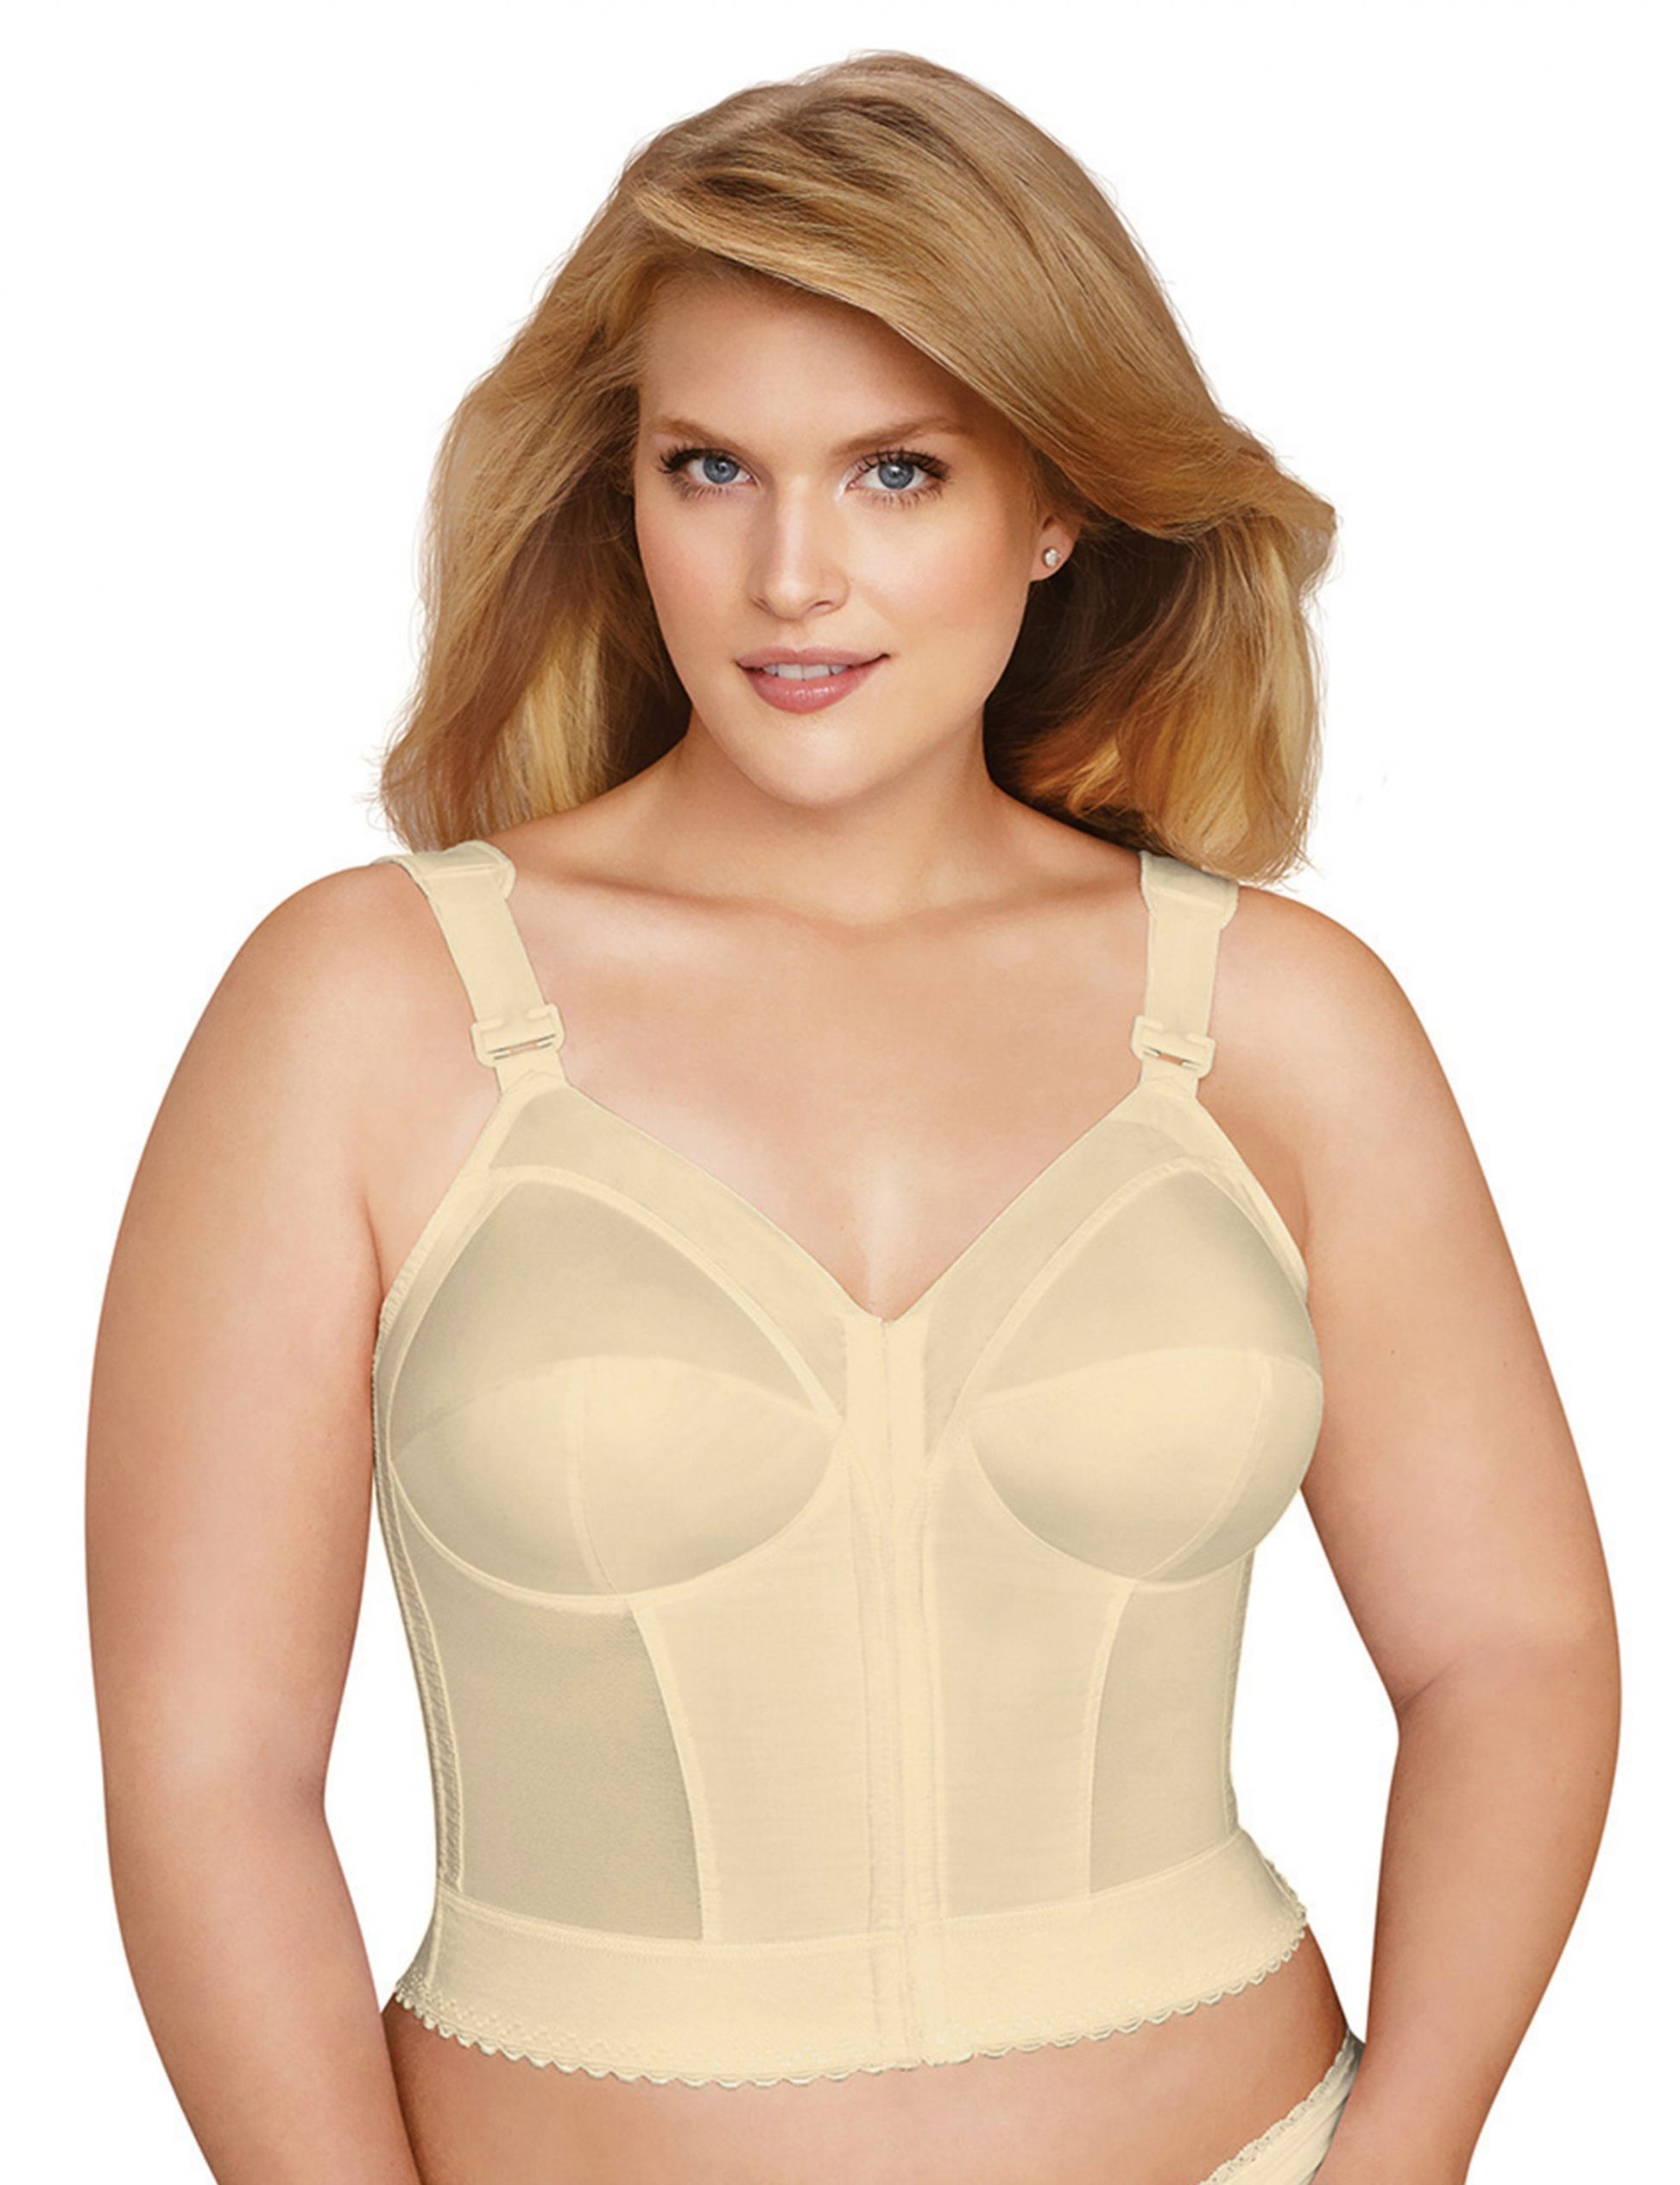  Exquisite Form Womens Plus Size Fully Front Close